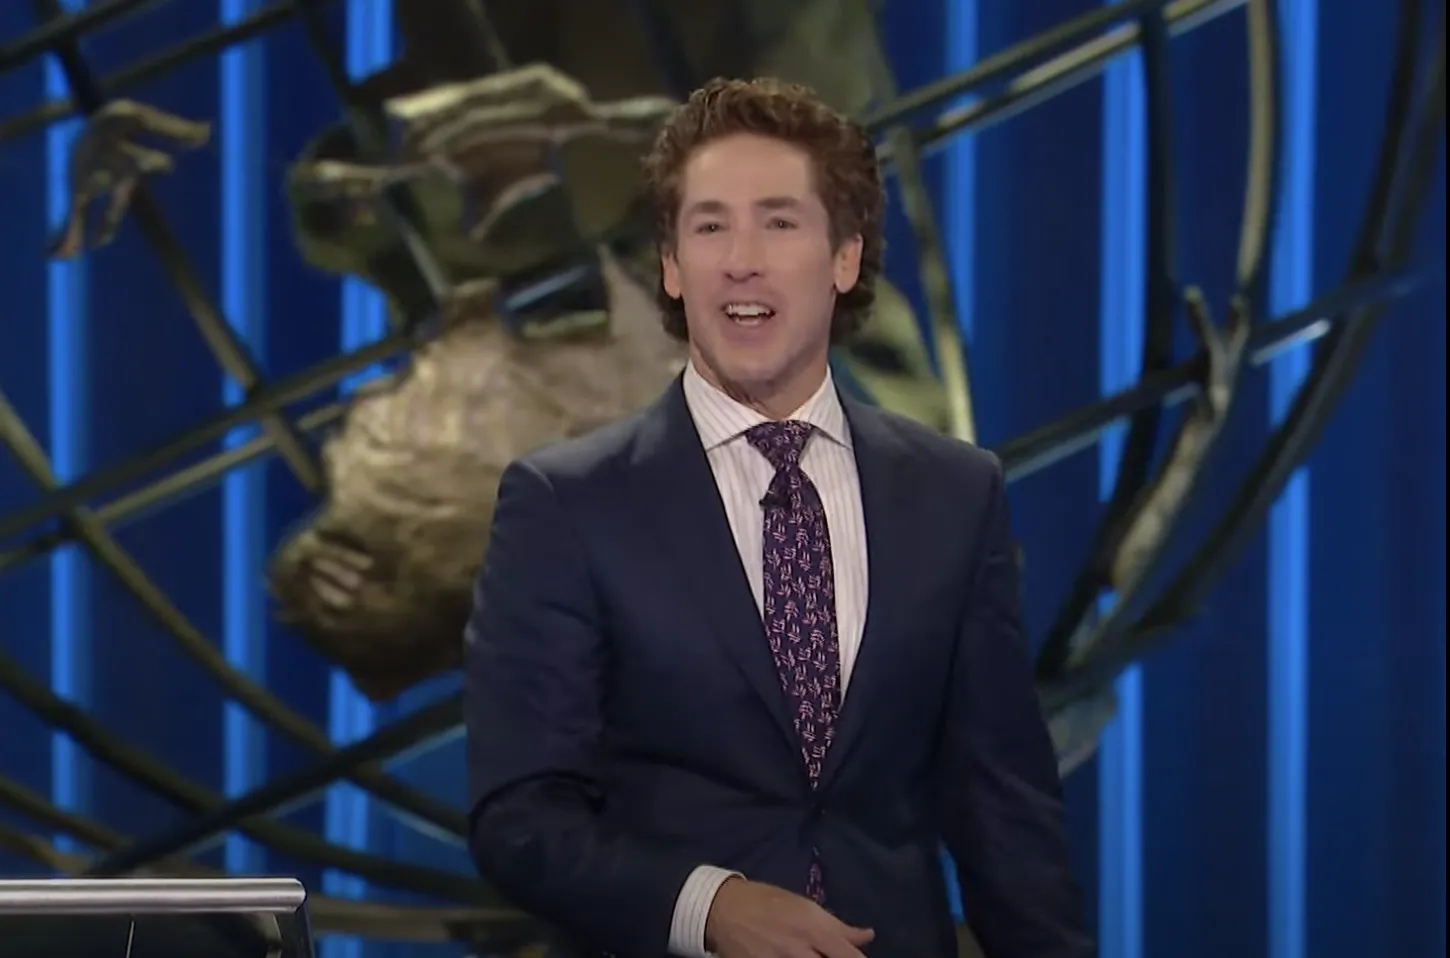 Joel Osteen preaches at Lakewood Church in Houston, Texas, during the 8:30 a.m. Sunday service on June 5, 2022. Pro-abortion activists disrupted the 11 a.m. service later the same day.?w=200&h=150